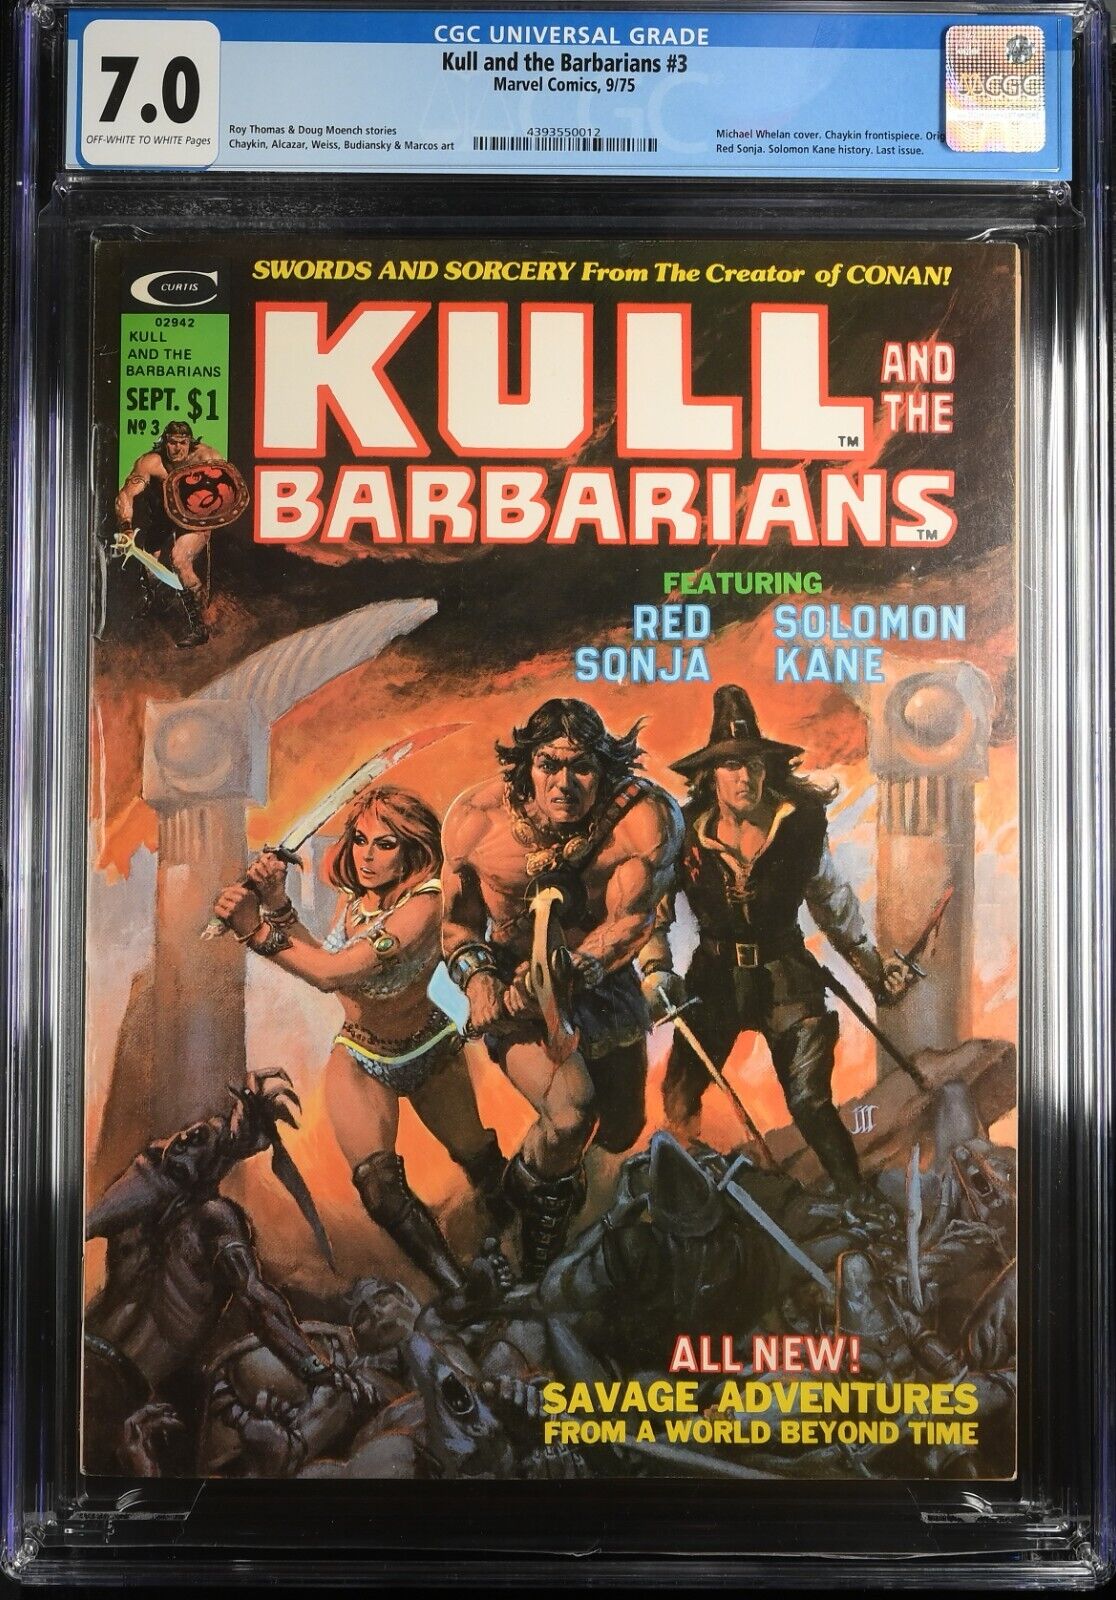 KULL AND THE BARBARIANS #3 - CGC 7.0 - OW/WP  - FN/VF - ORIGIN OF RED SONJA